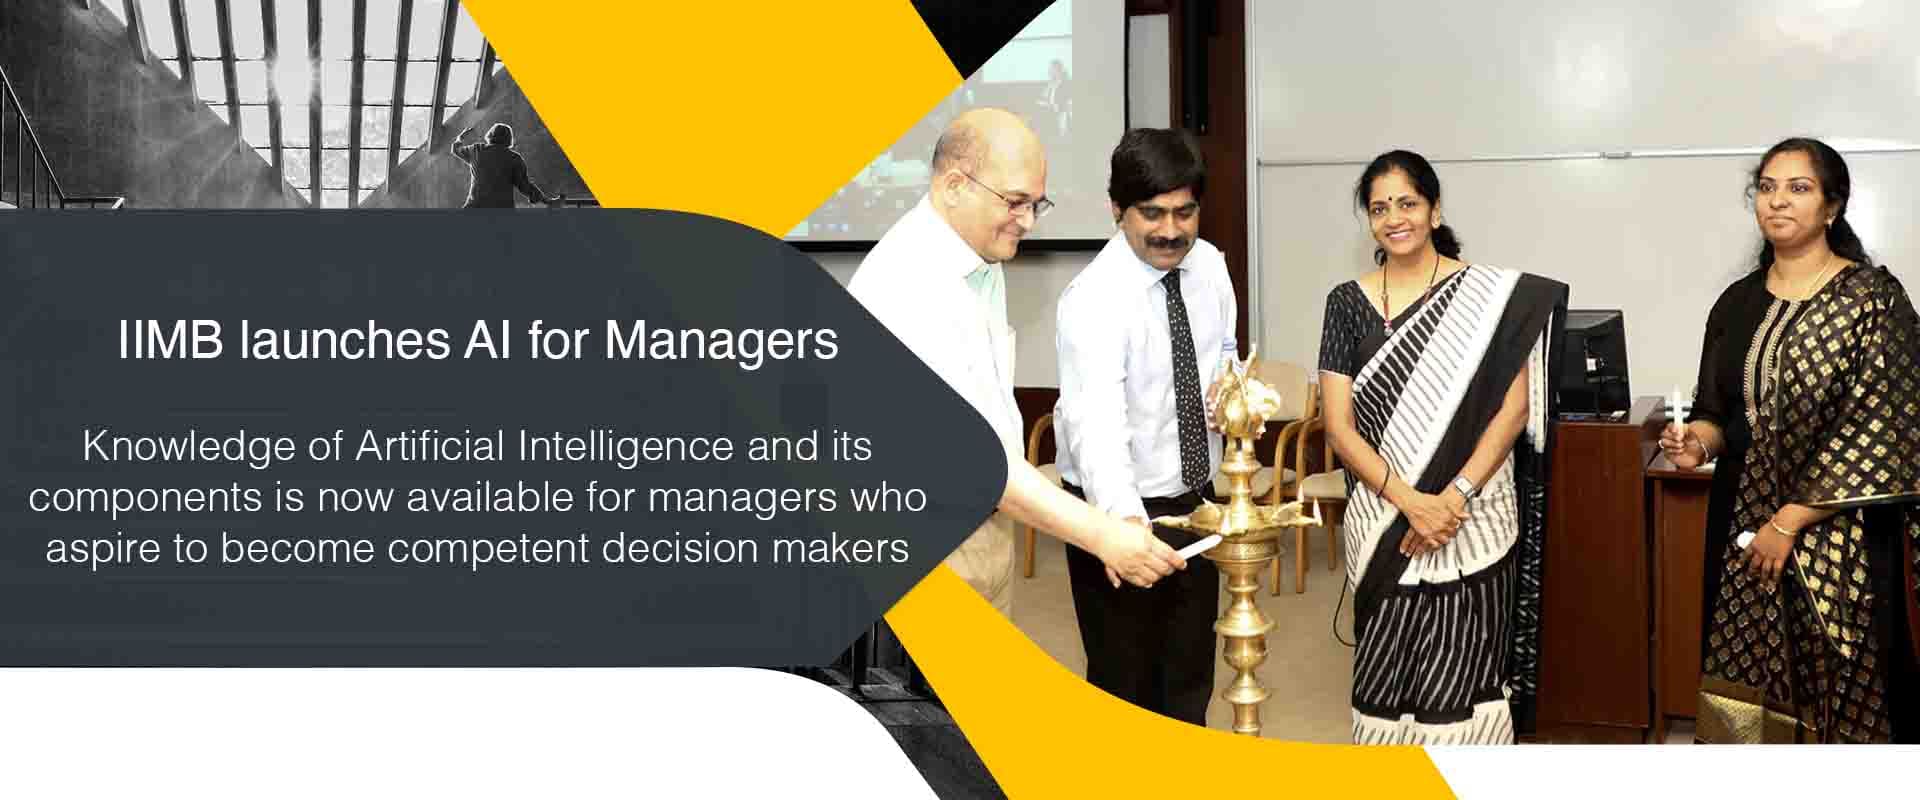 IIMB launches AI for Managers 